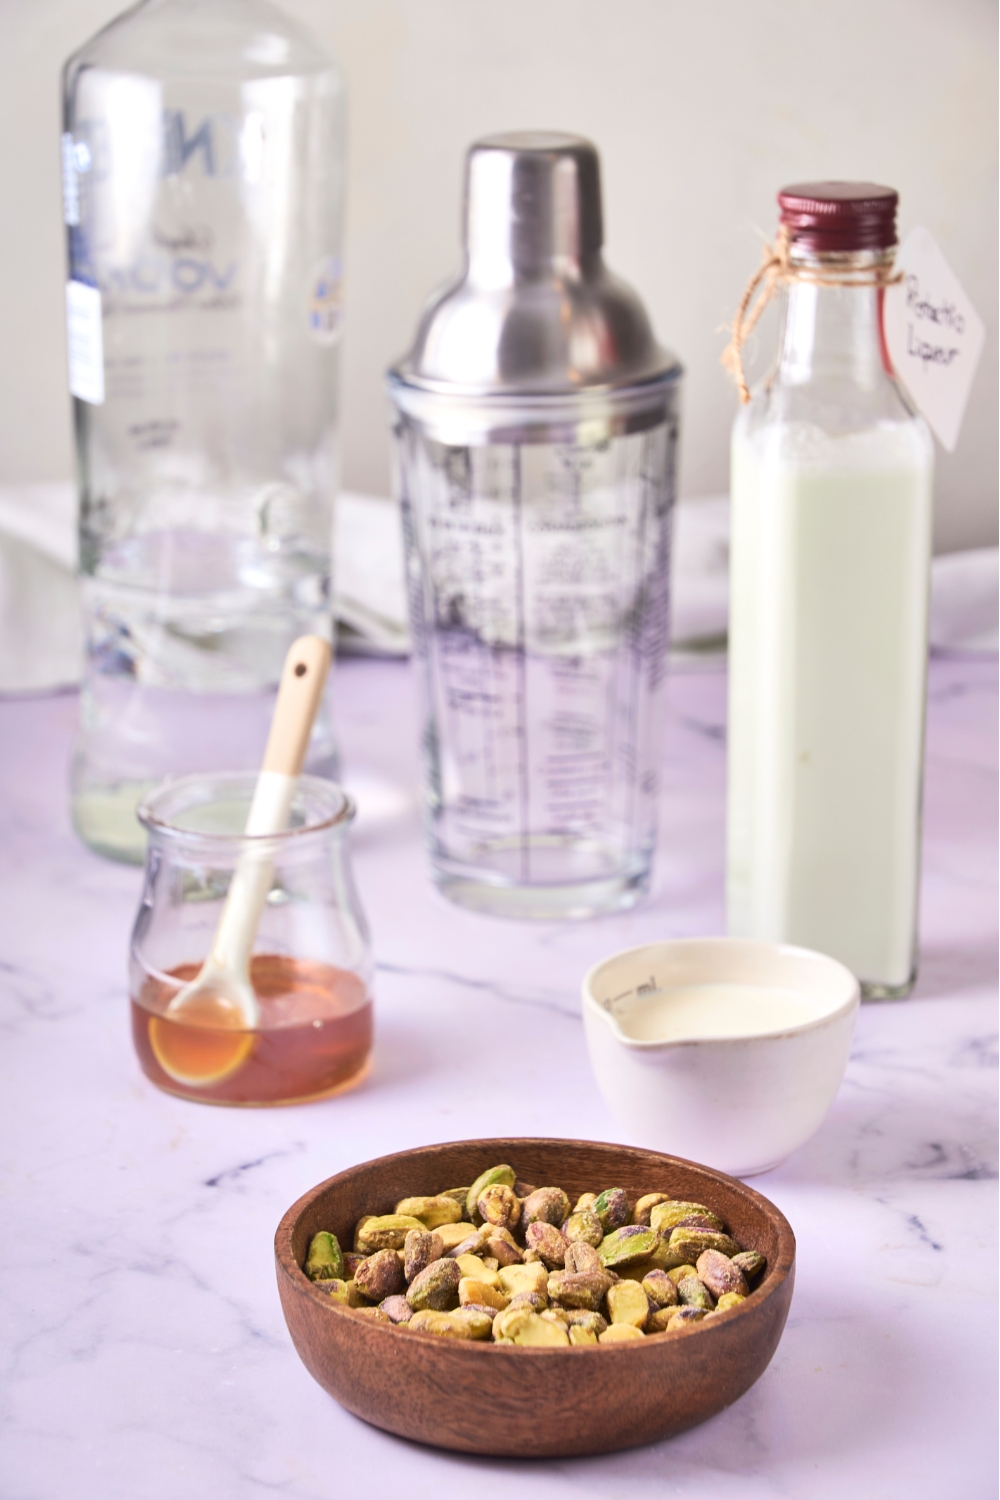 A countertop with multiple bowls and containers with ingredients like pistachios, vanilla vodka, pistachio liqueur, and honey.